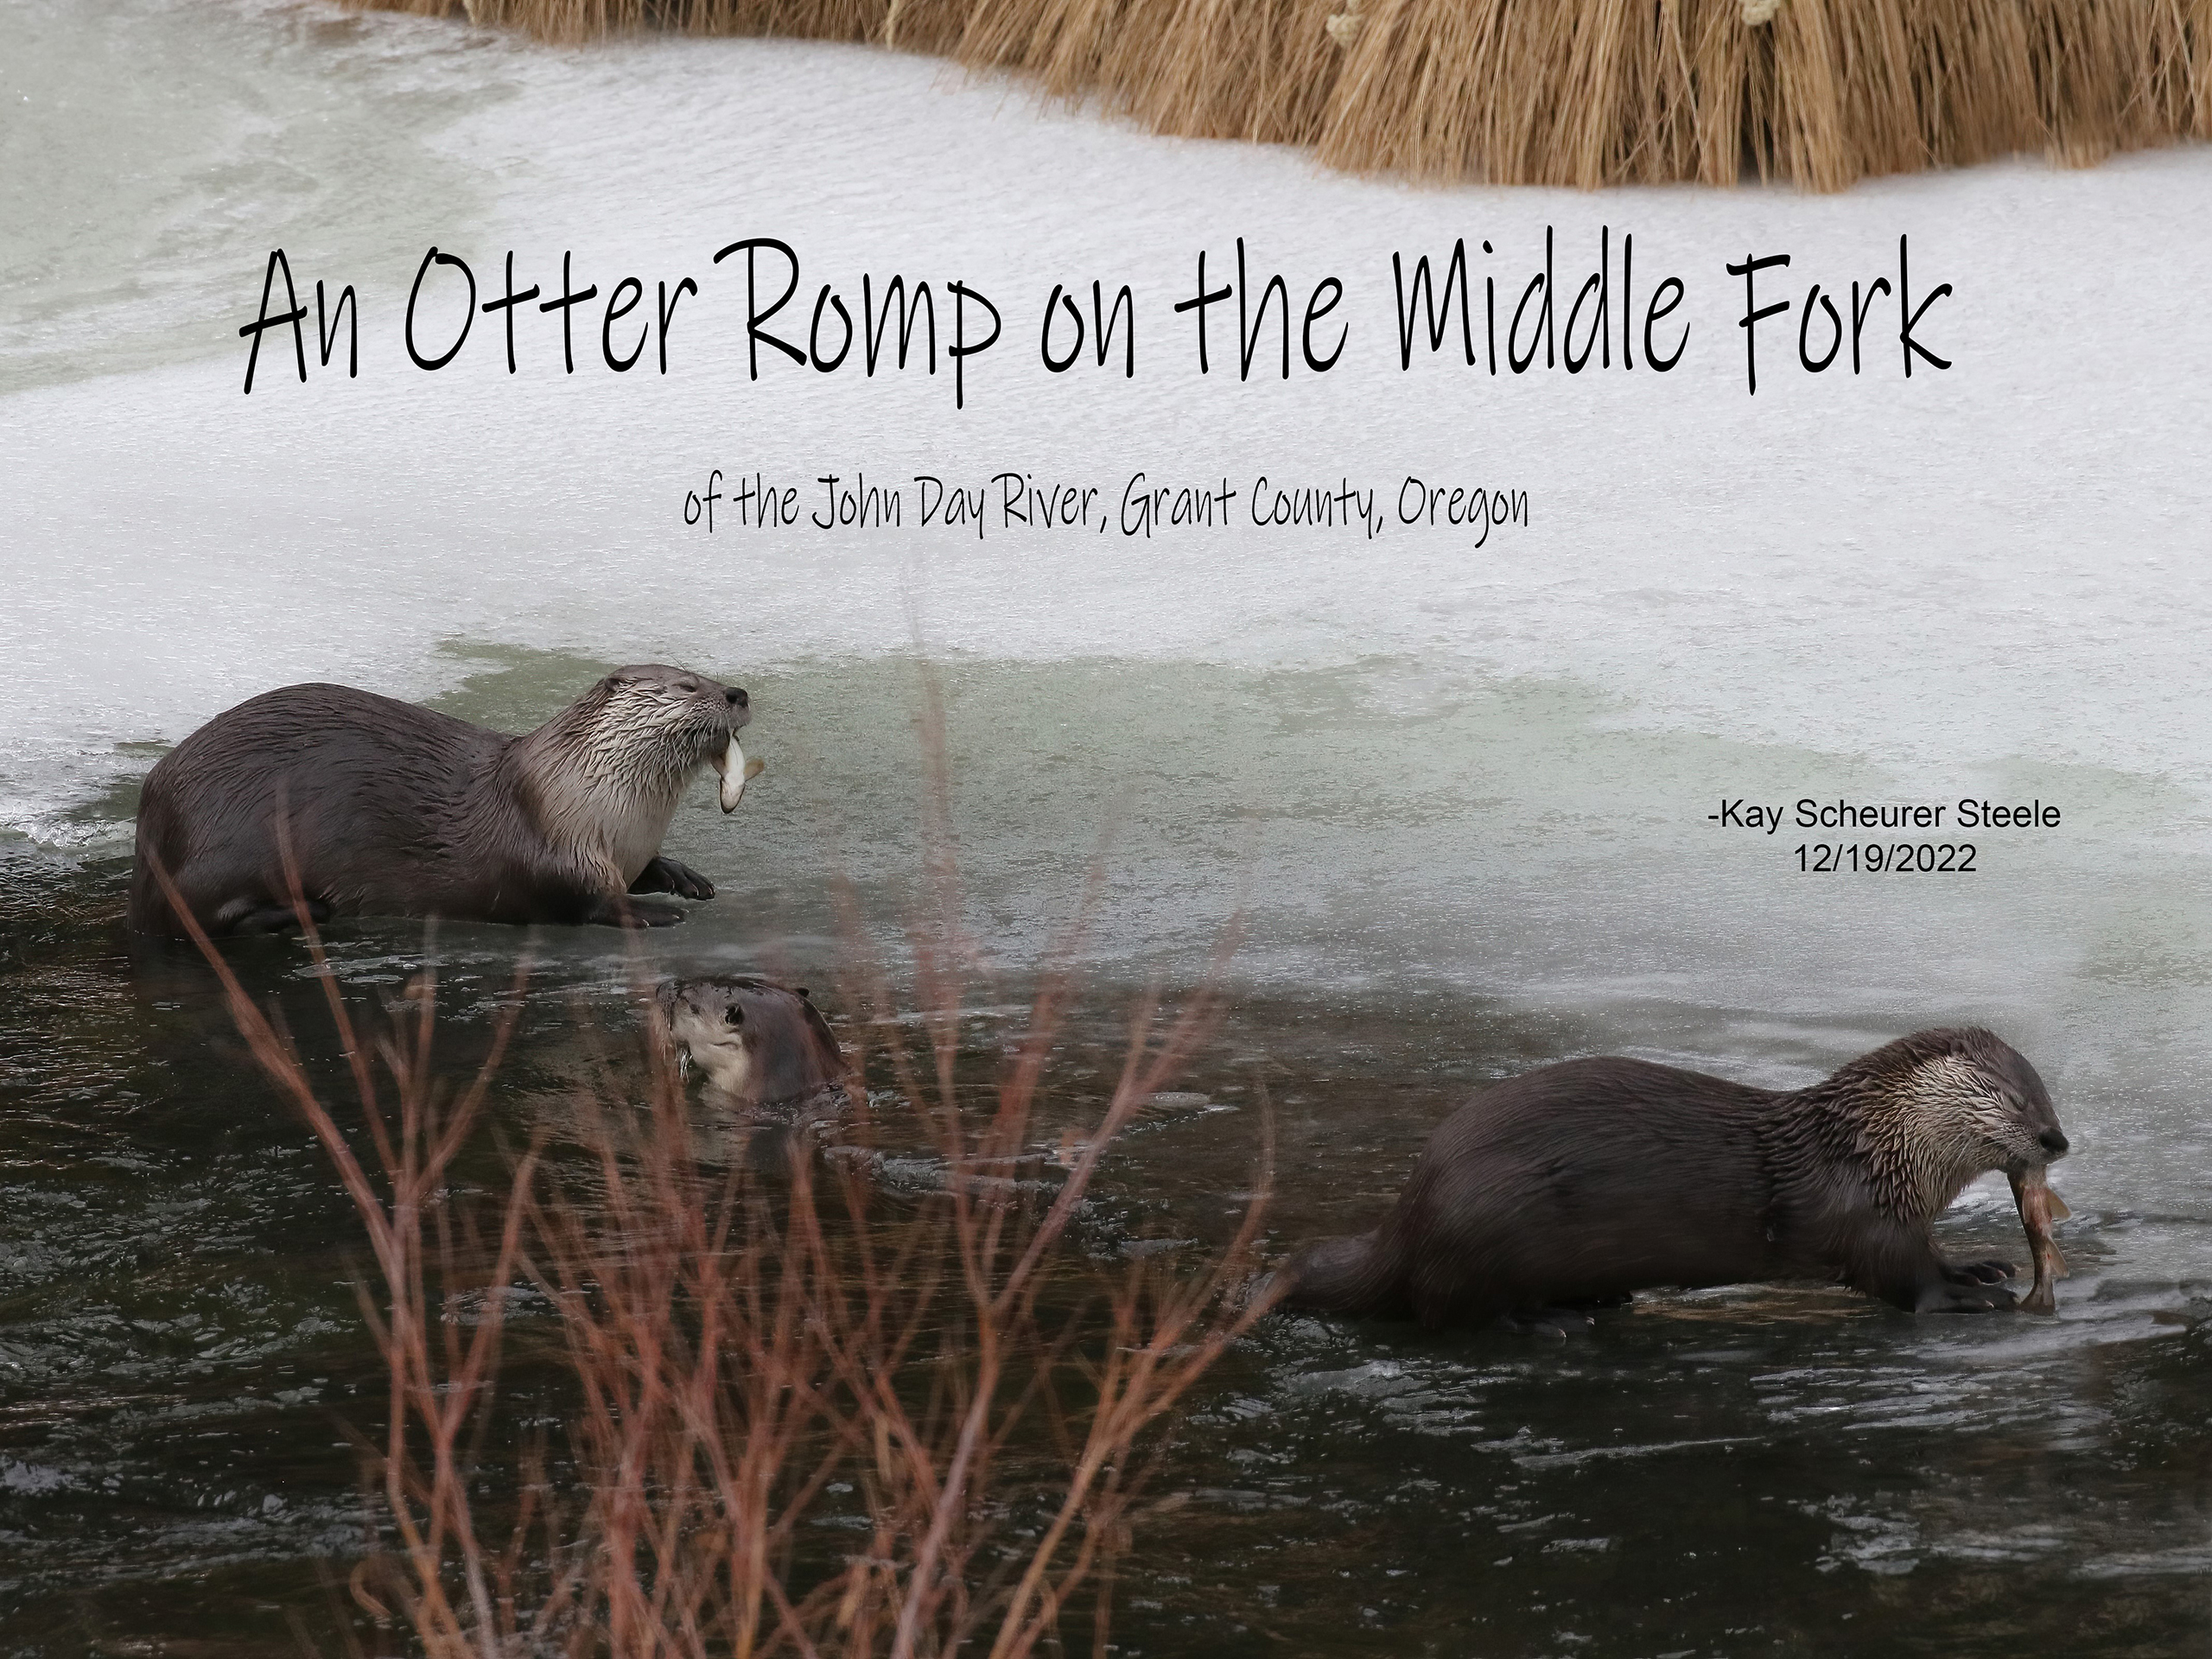 An Otter Romp on the Middle Fork